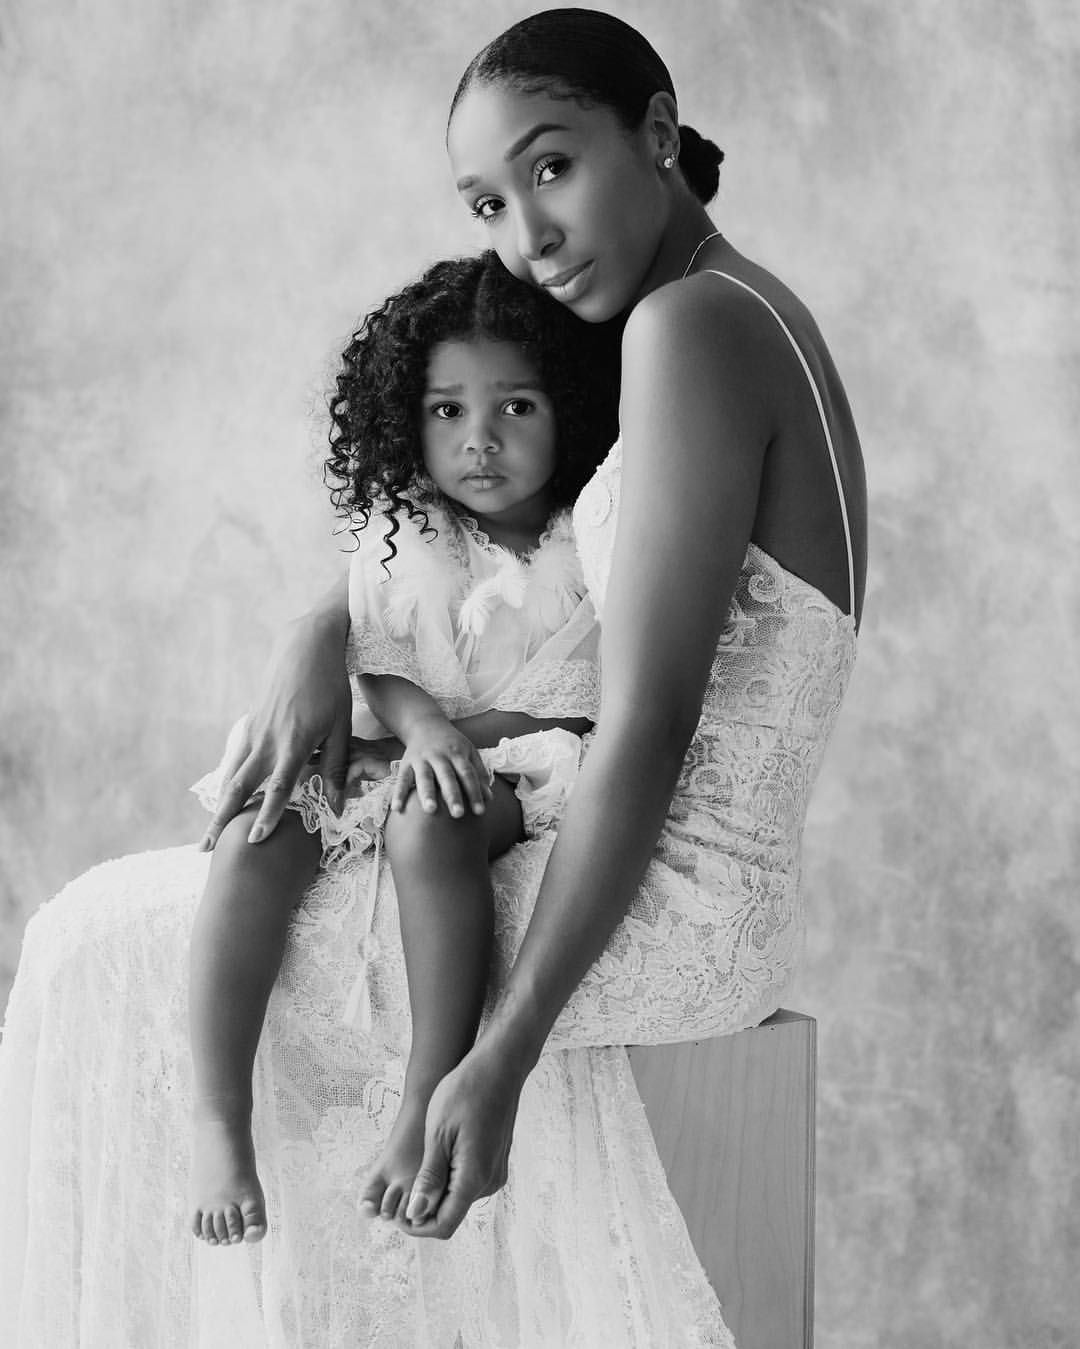 Mommy and Me Shoot via Pinterest of Melanie Marie and daughter